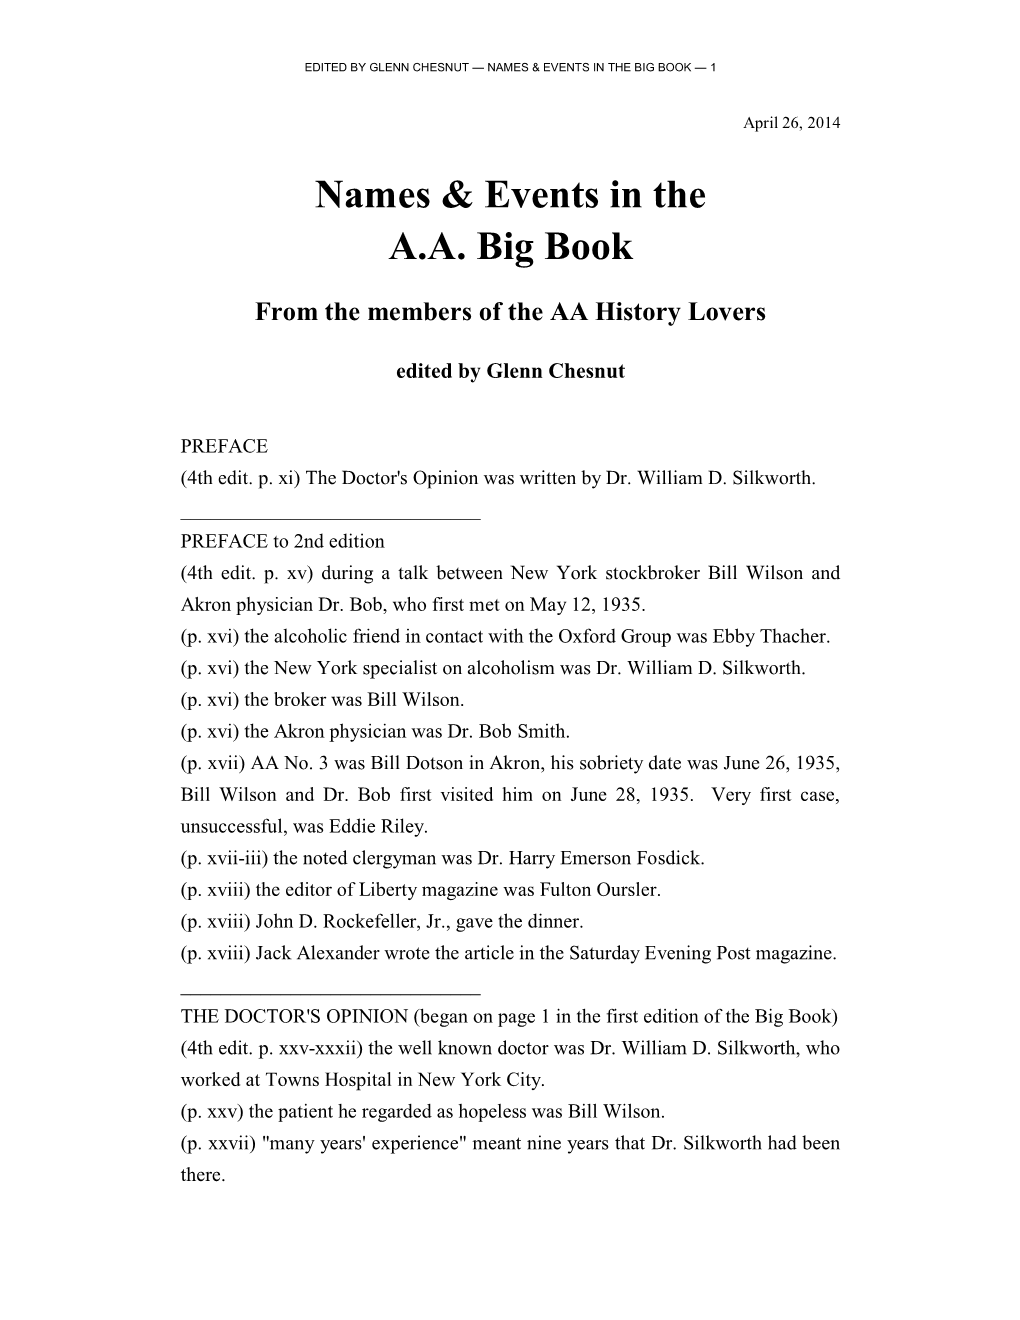 Names & Events in the A.A. Big Book